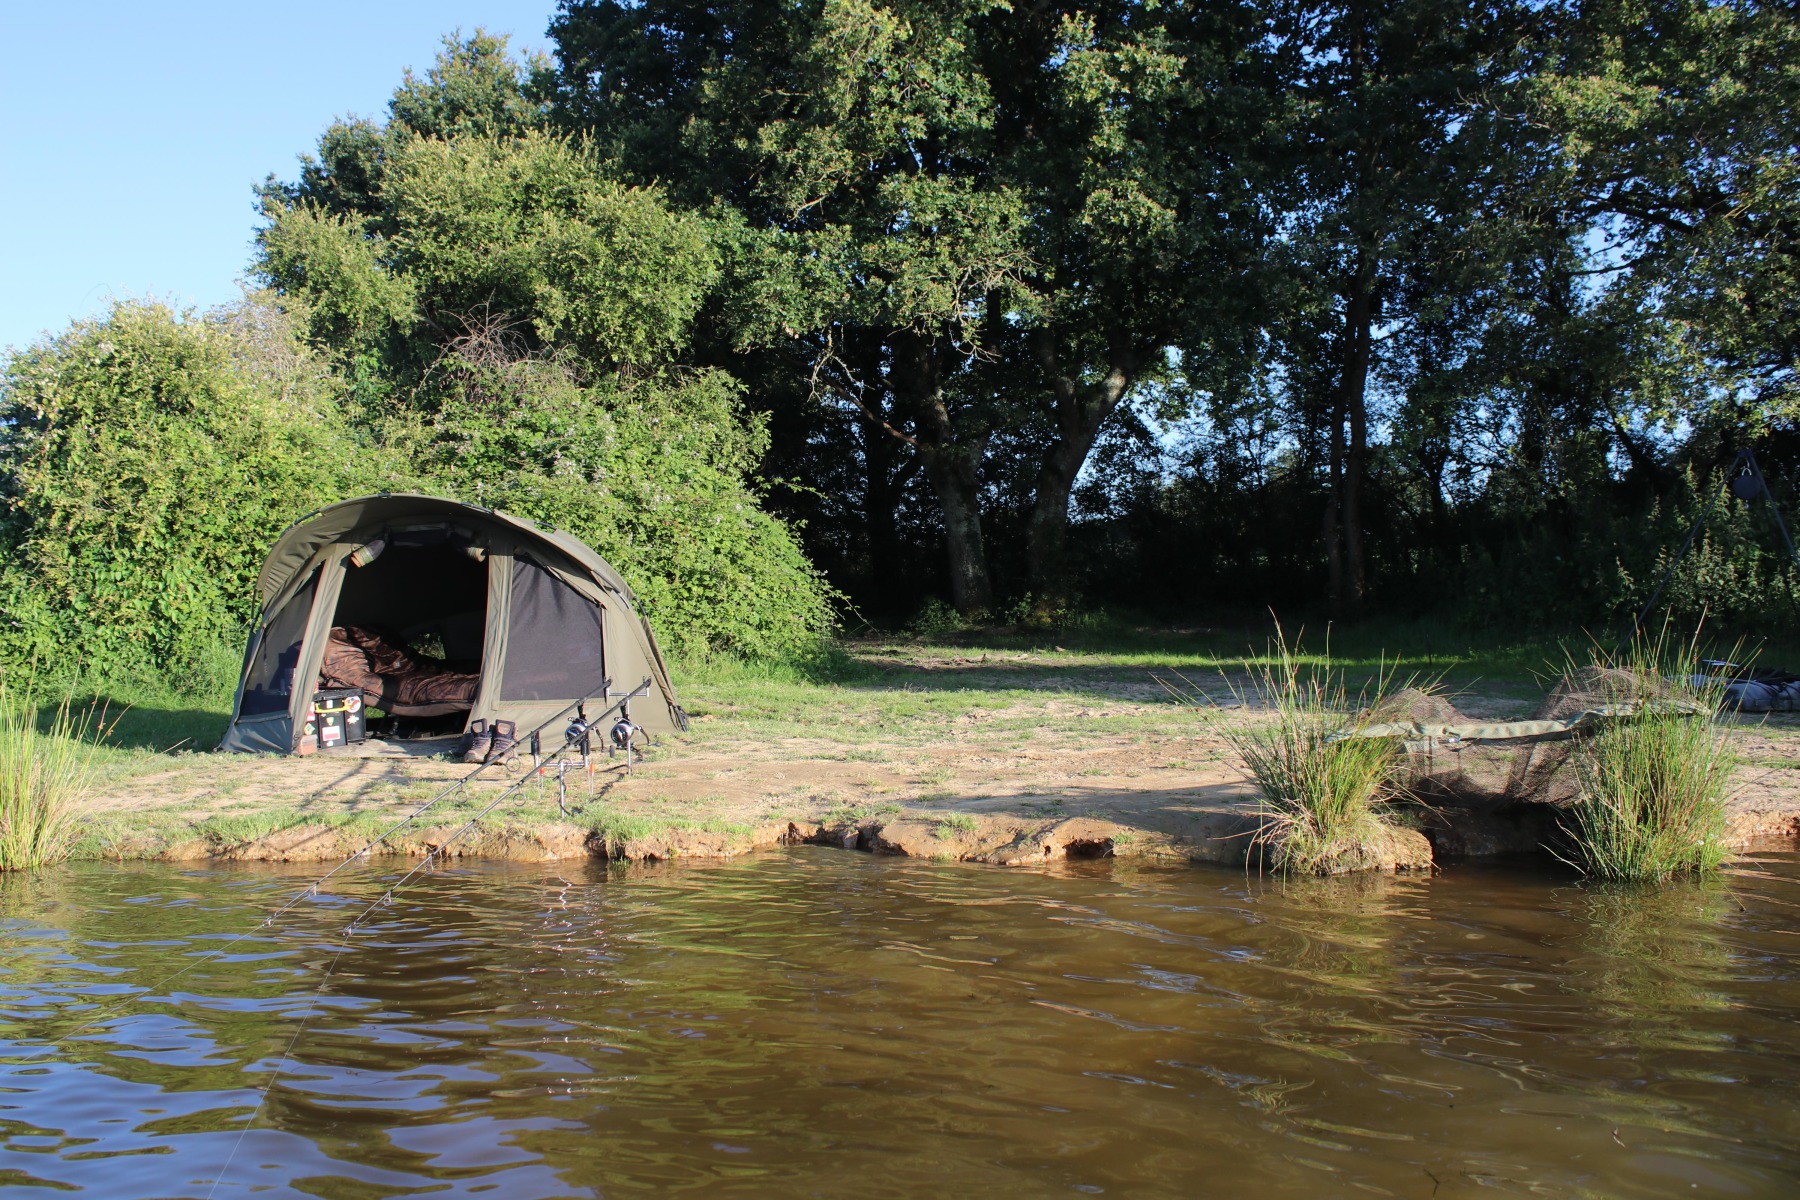 Carp fishing in The Netherlands with Dan Cleary!